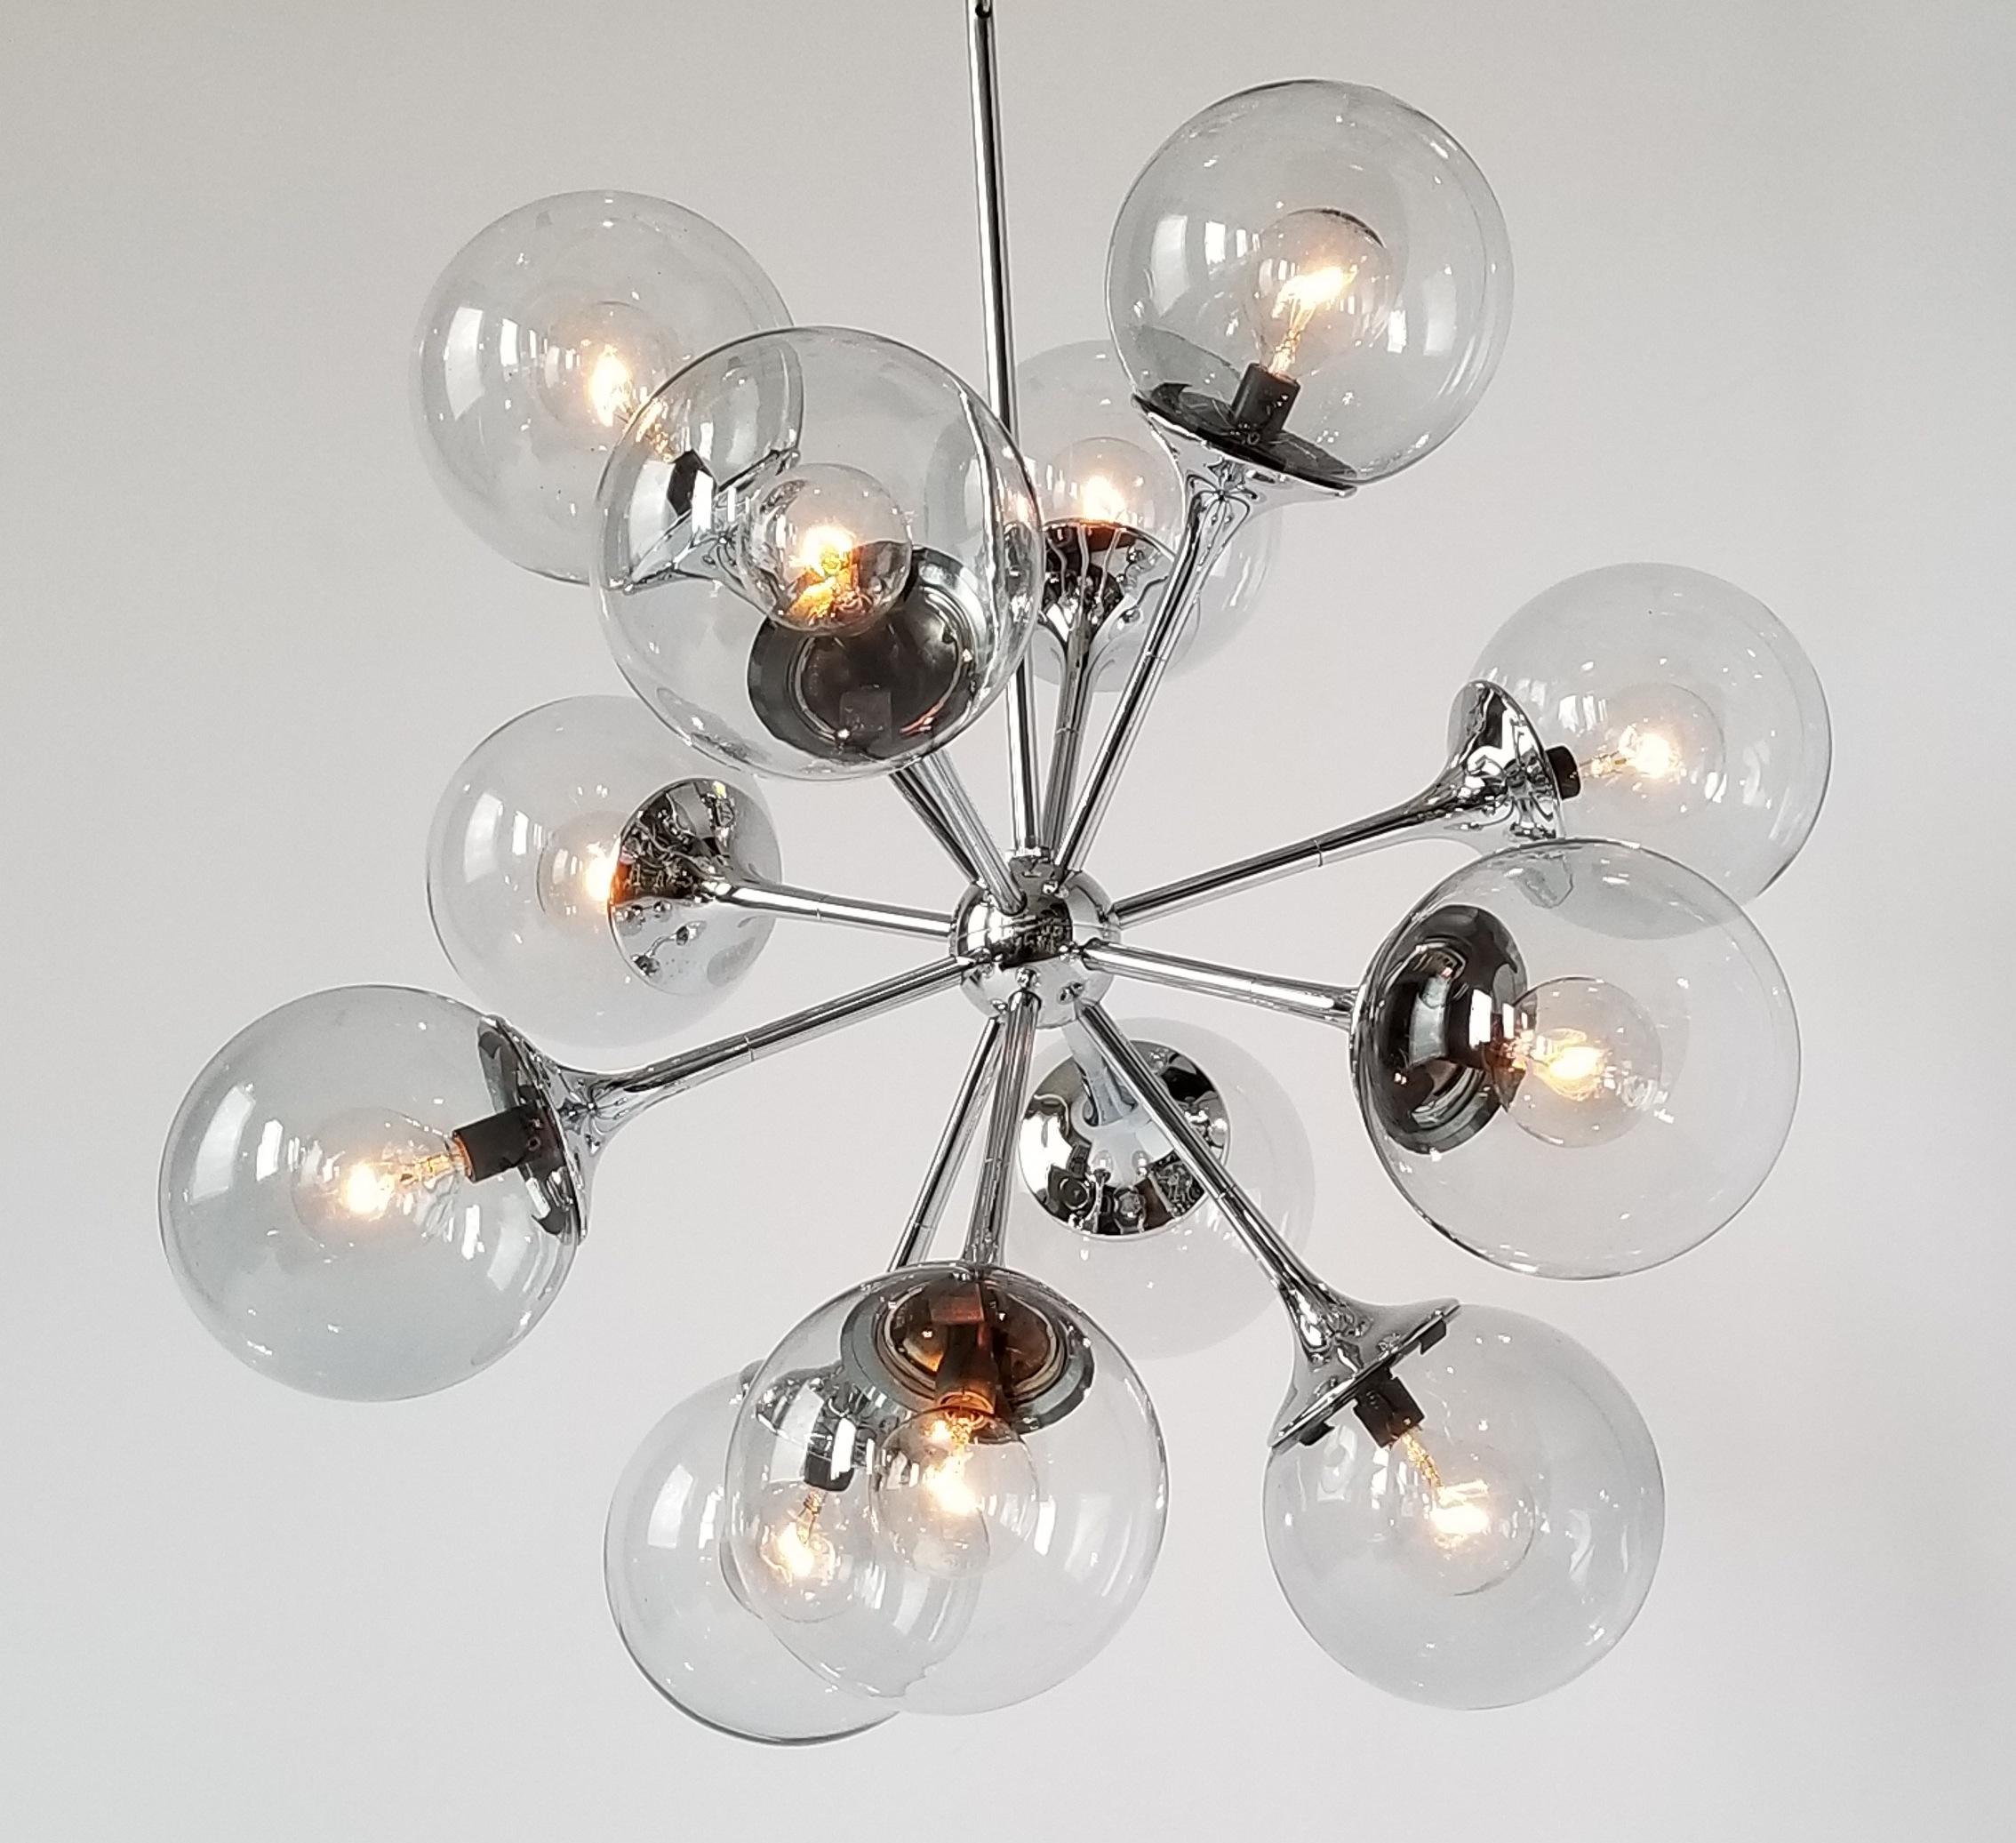 Deep chrome finish chandelier with mouth blowed glass shade, 1970s

Well made solid sturdy construction. 

Contain 12 E12 candelabra size socket rated at 40 watt max. 

Sputnik measure 23 X 23 in. Total length with chain and canopy 34 in. 

